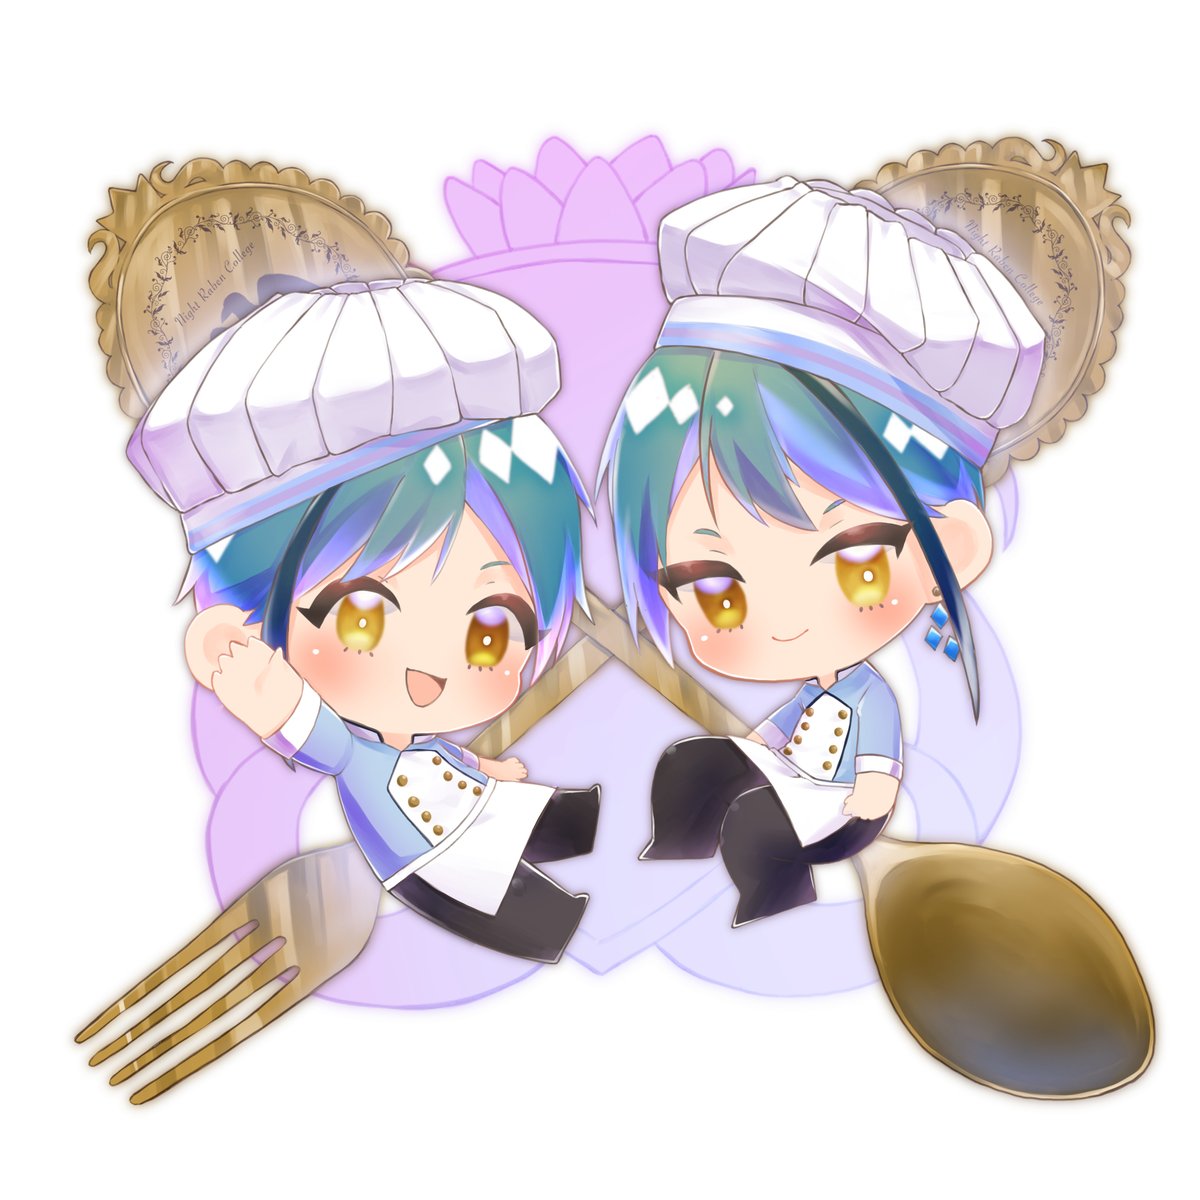 streaked hair brothers siblings chibi twins smile yellow eyes  illustration images